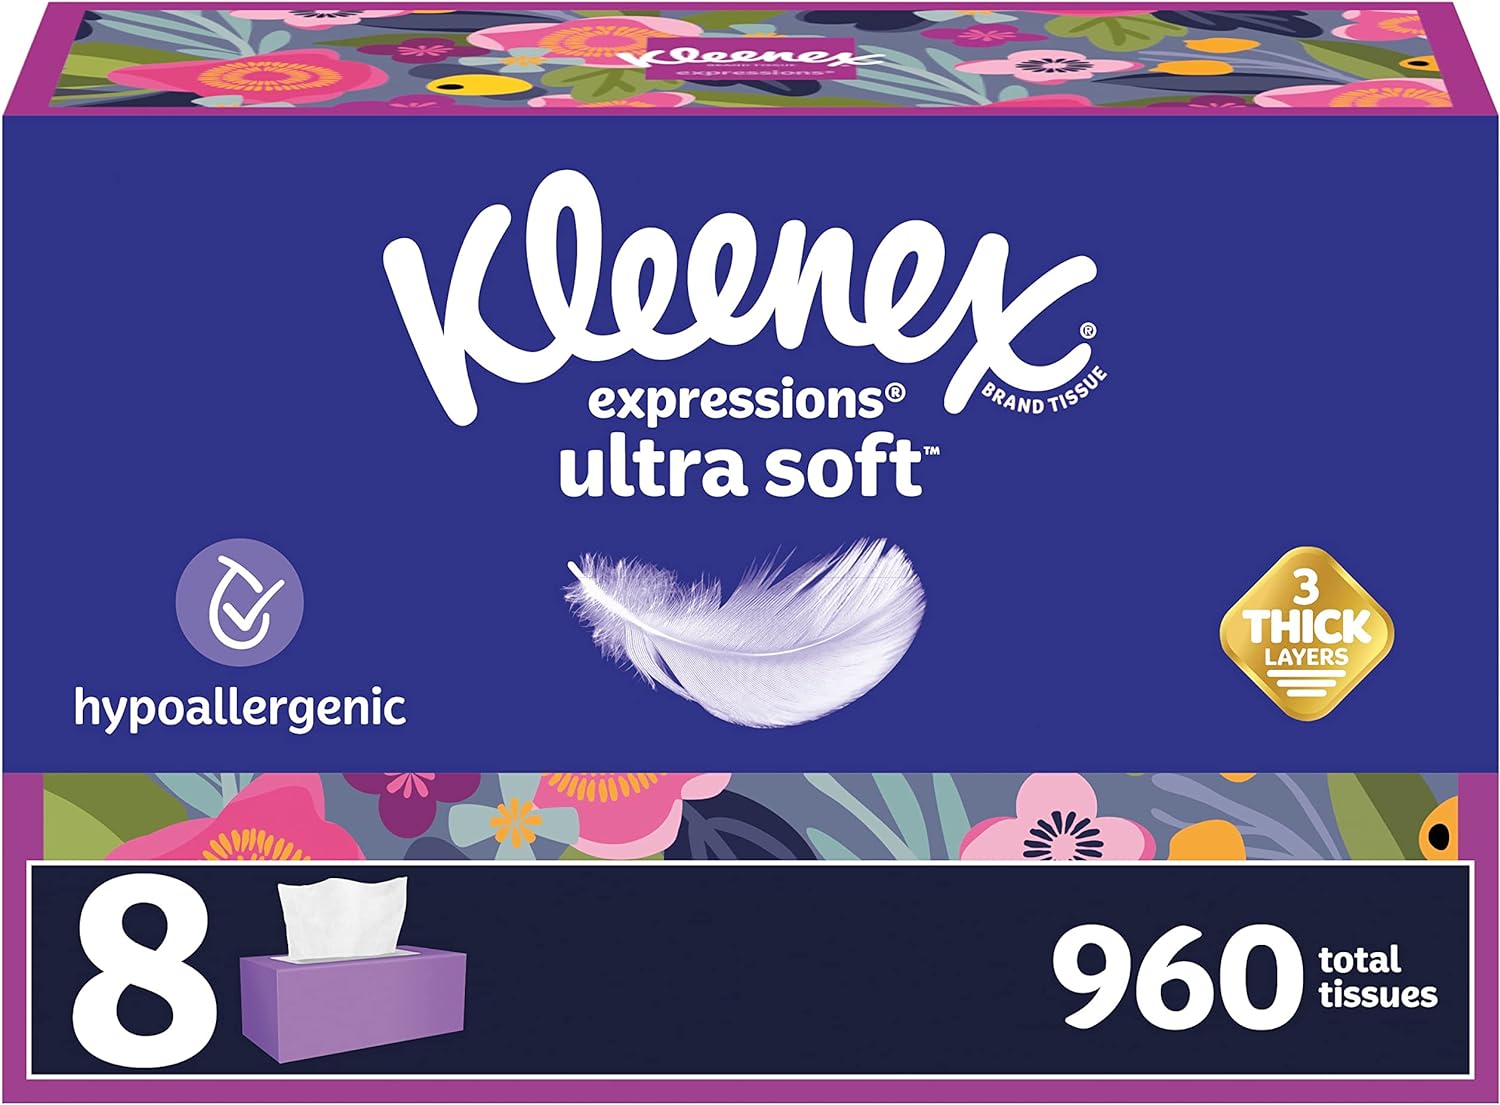 Kleenex Expressions Ultra Soft Facial Tissues, 8 Flat Boxes, 120 Tissues per Box, 3-Ply, Packaging May Vary